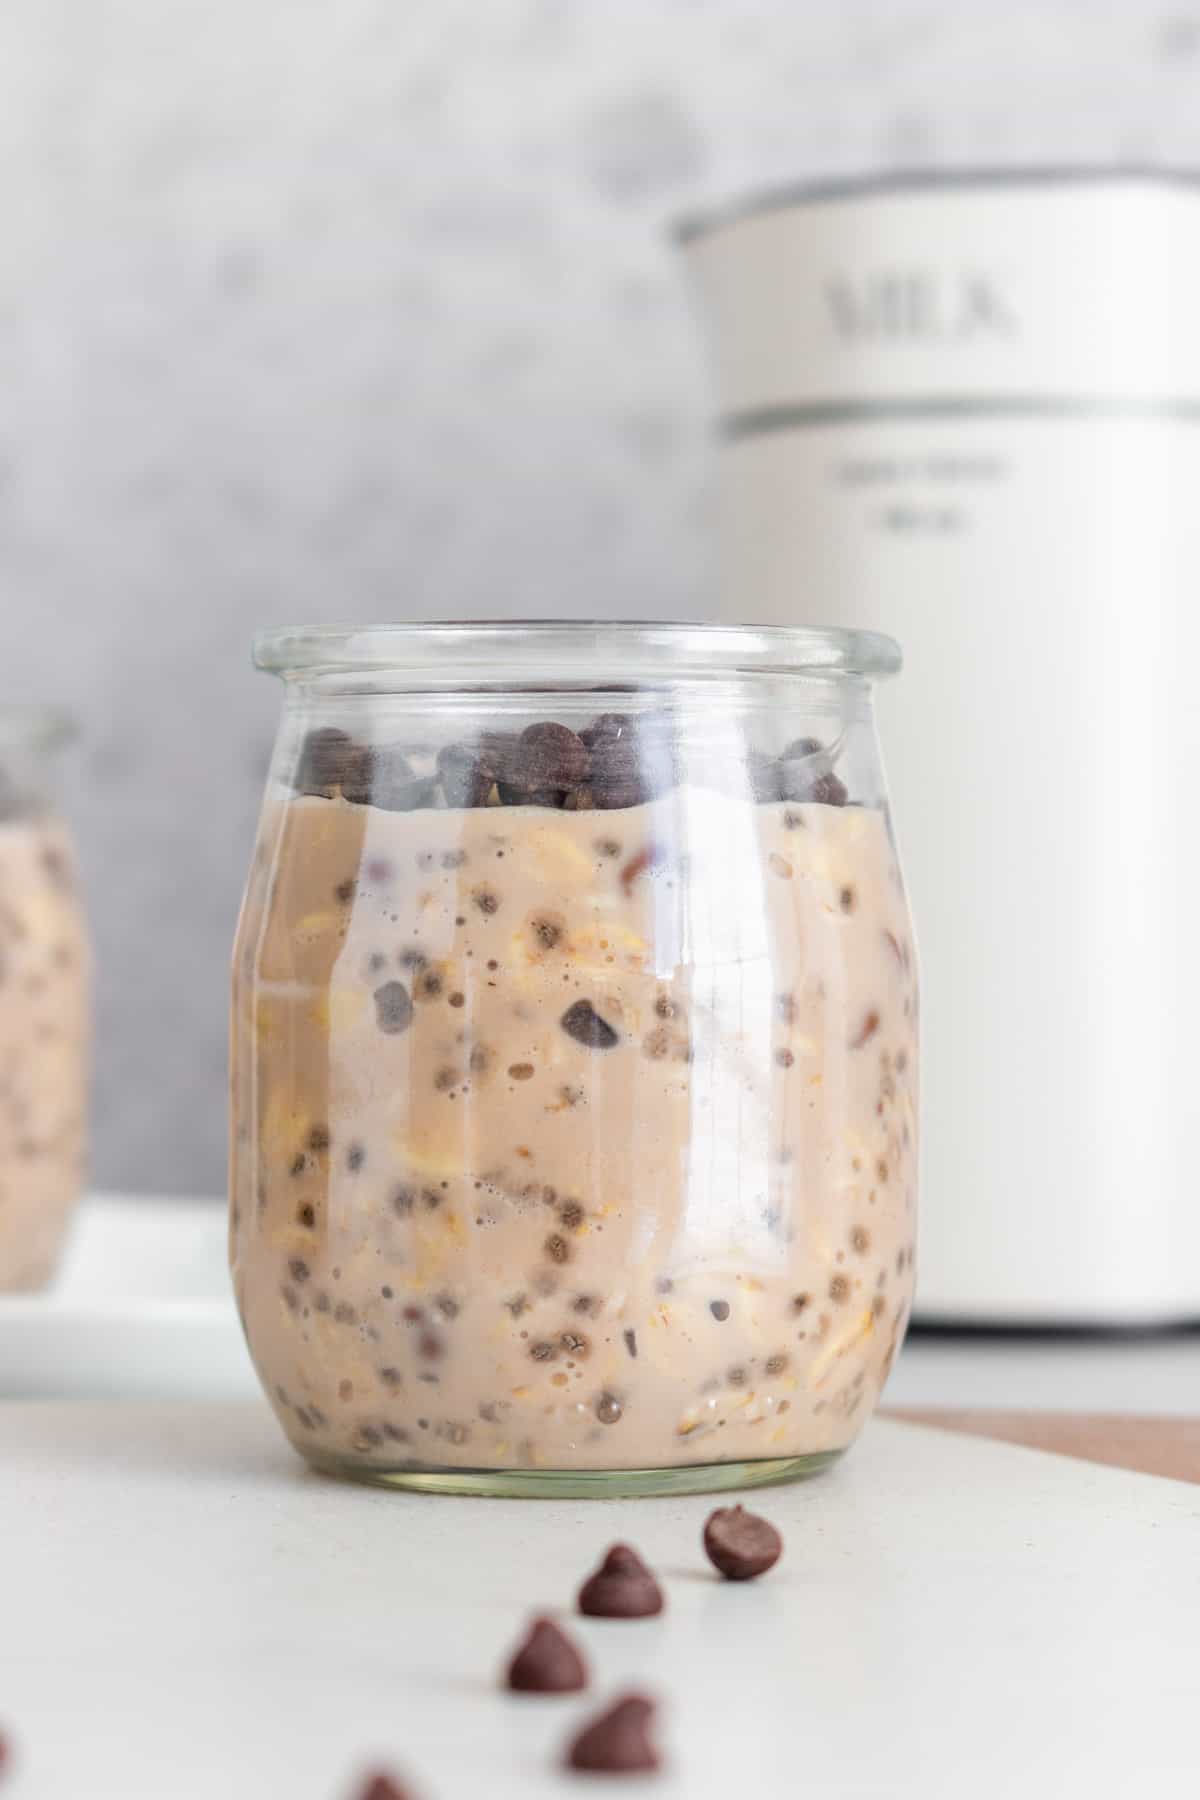 A small cup of chocolate protein overnight oats with mini chocolate chips on top and scattered around.